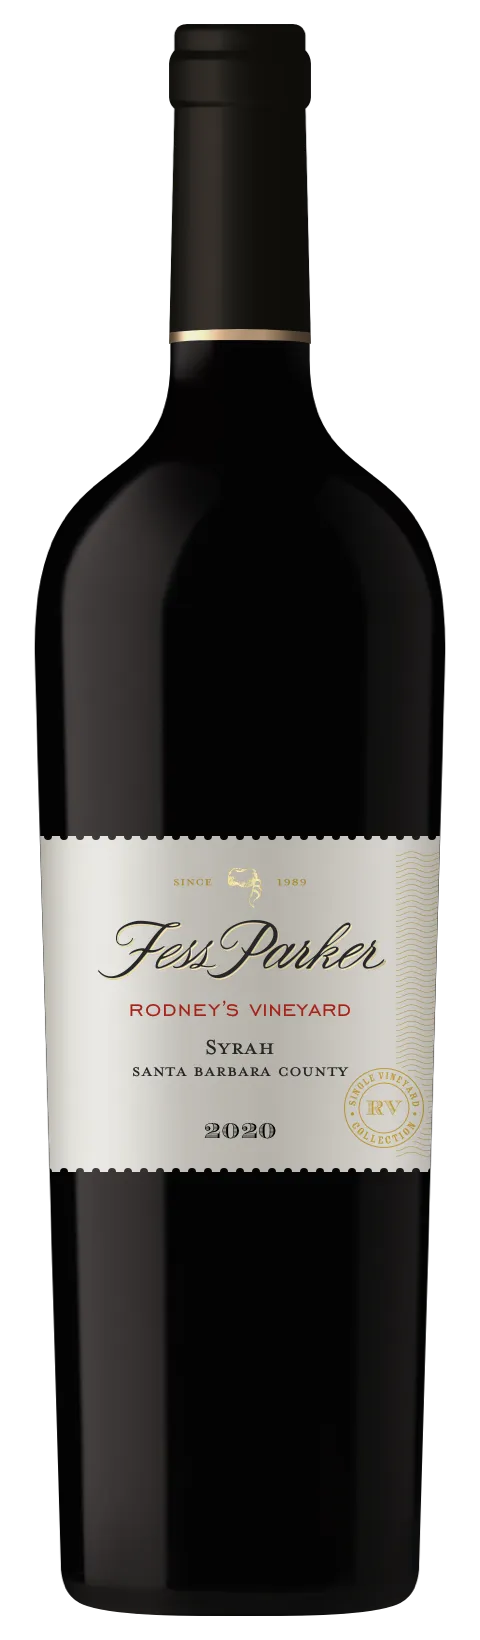 Bottle of Fess Parker Rodney's Vineyard Syrah from search results